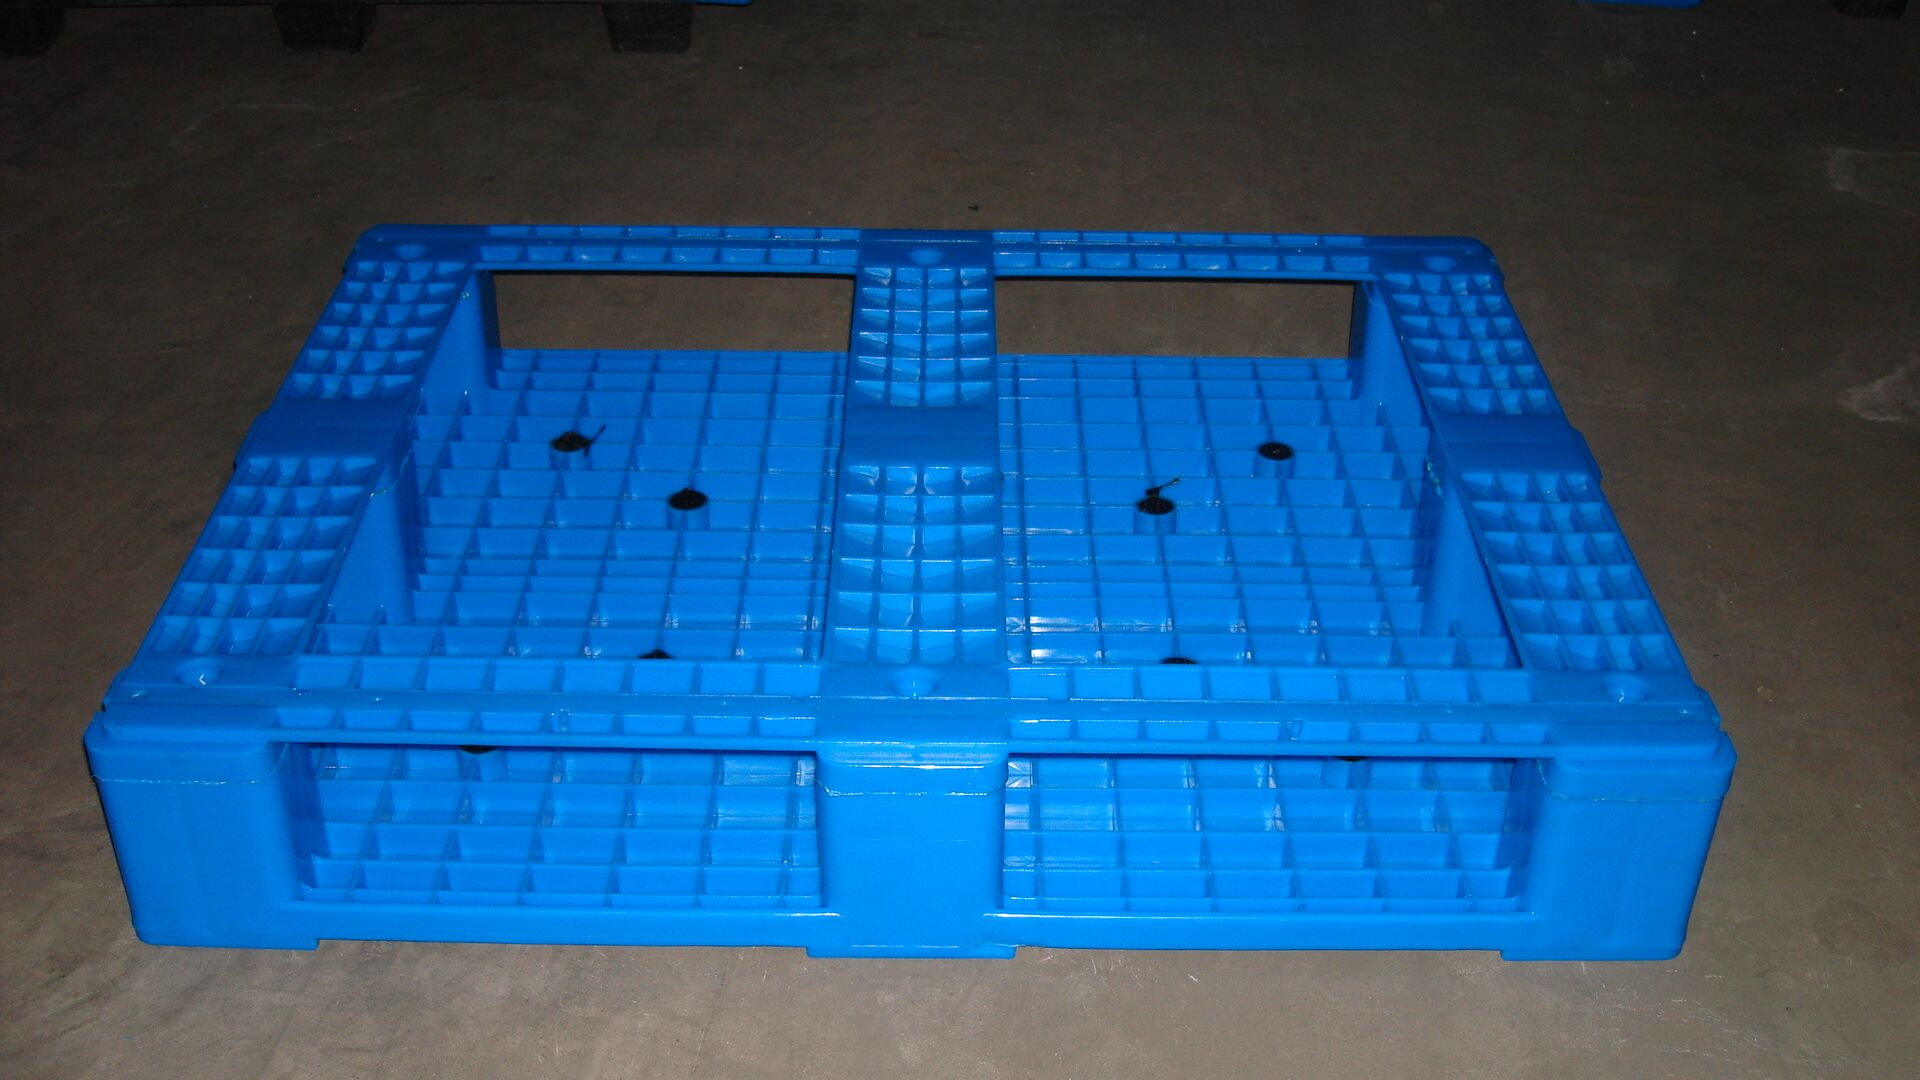 Special Solid Top Anti-slip Plastic Pallets with Lip